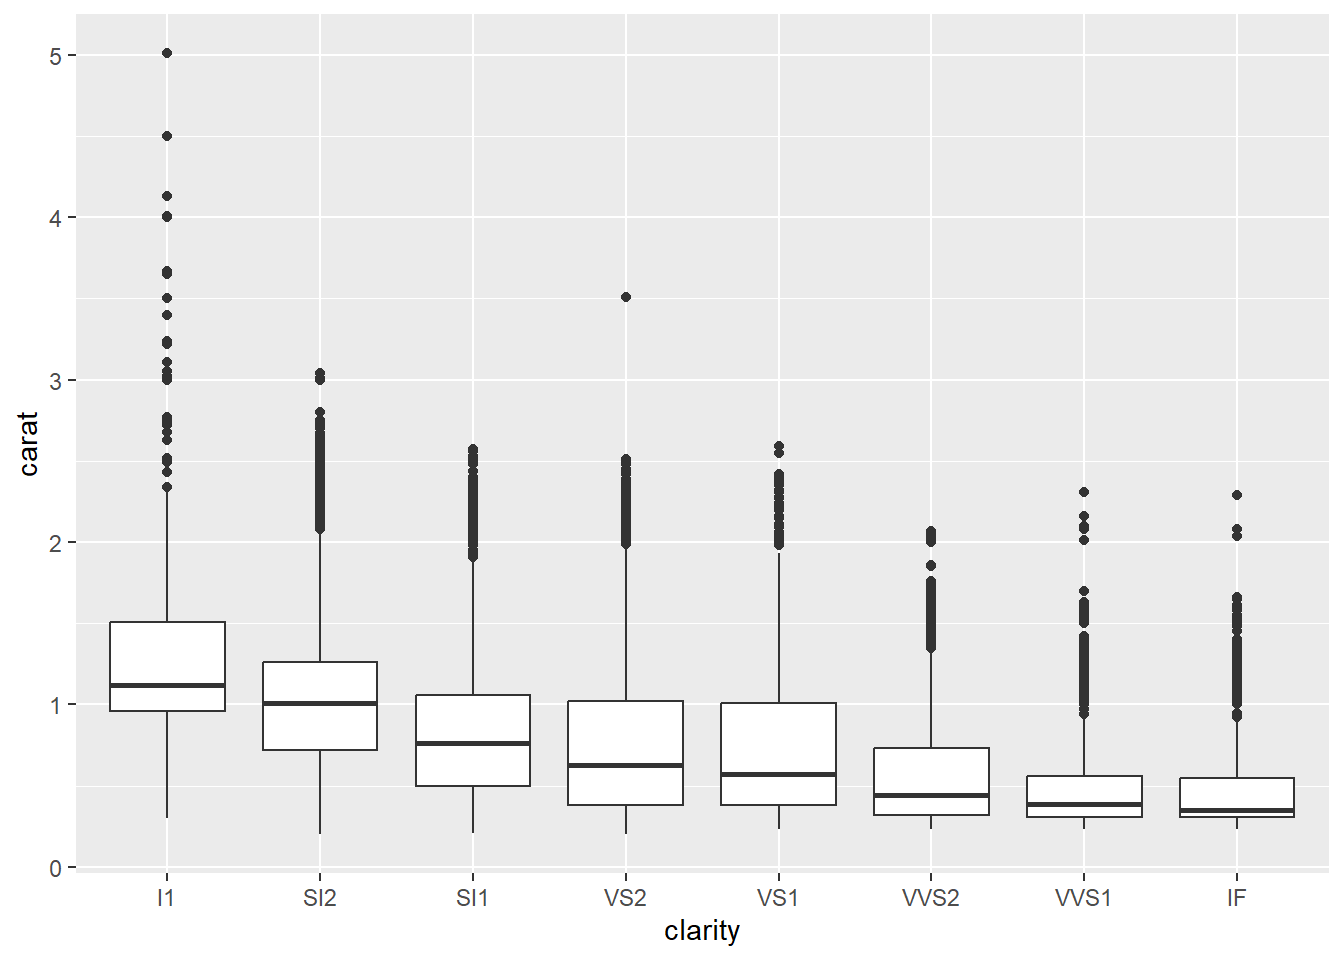 A ggplot object with a geom_boxplot, the carat of diamonds by their clarity